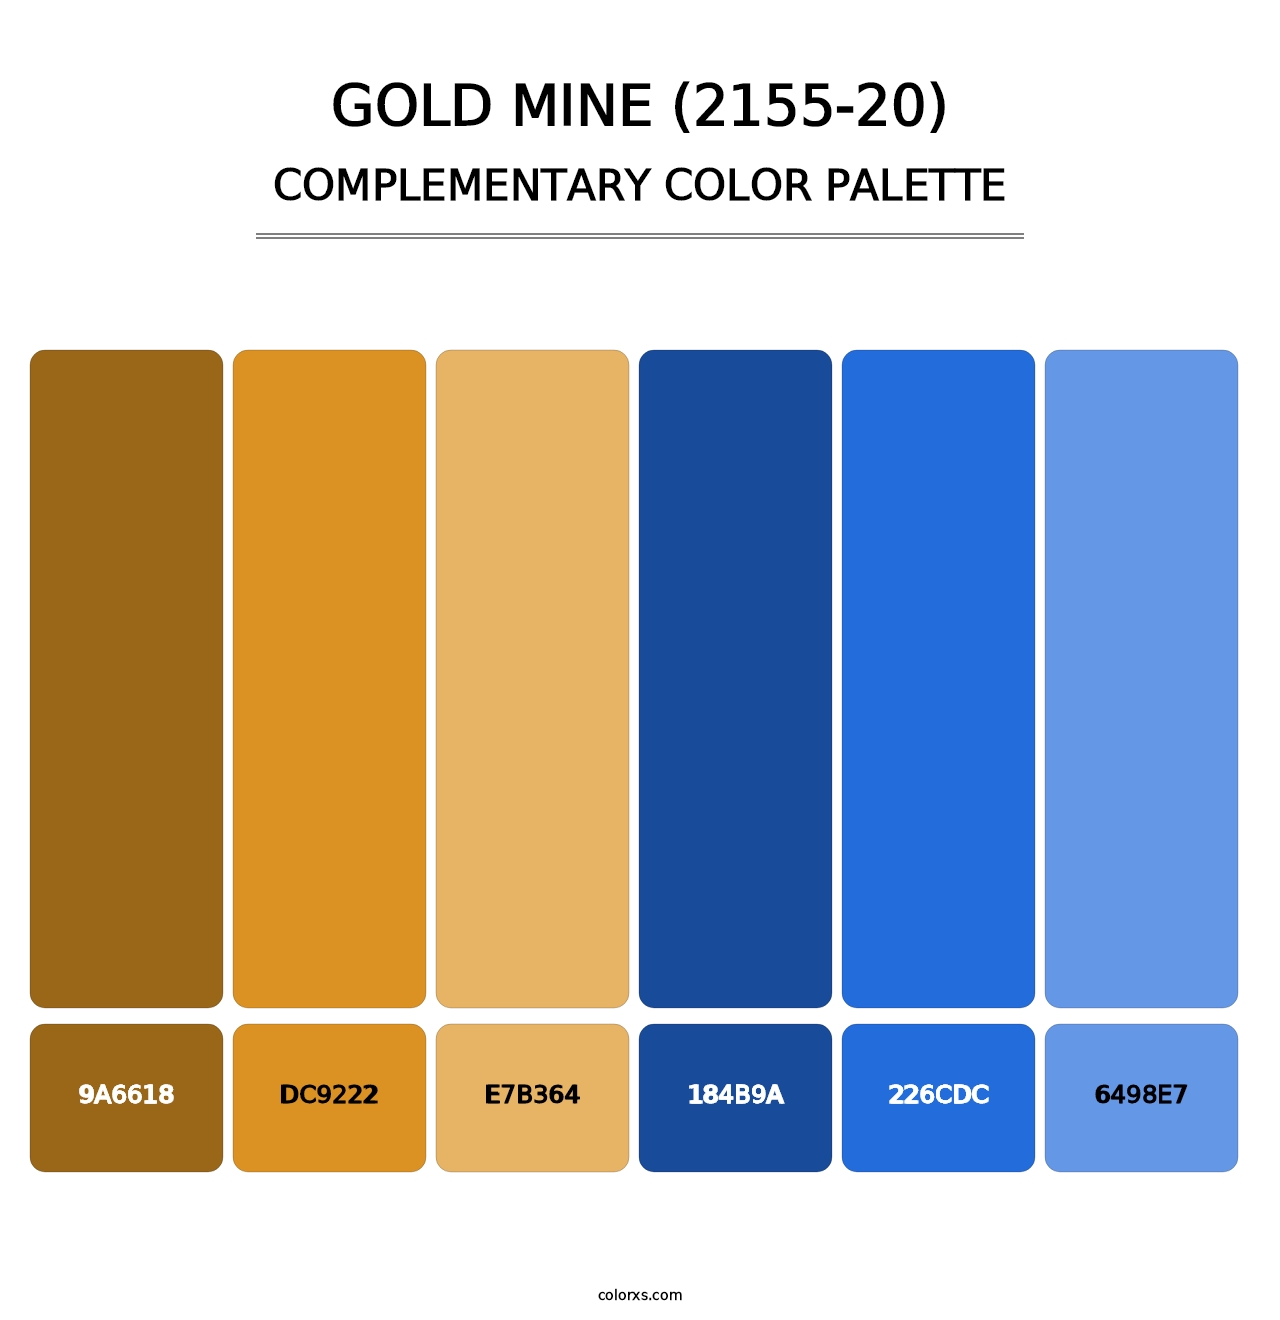 Gold Mine (2155-20) - Complementary Color Palette